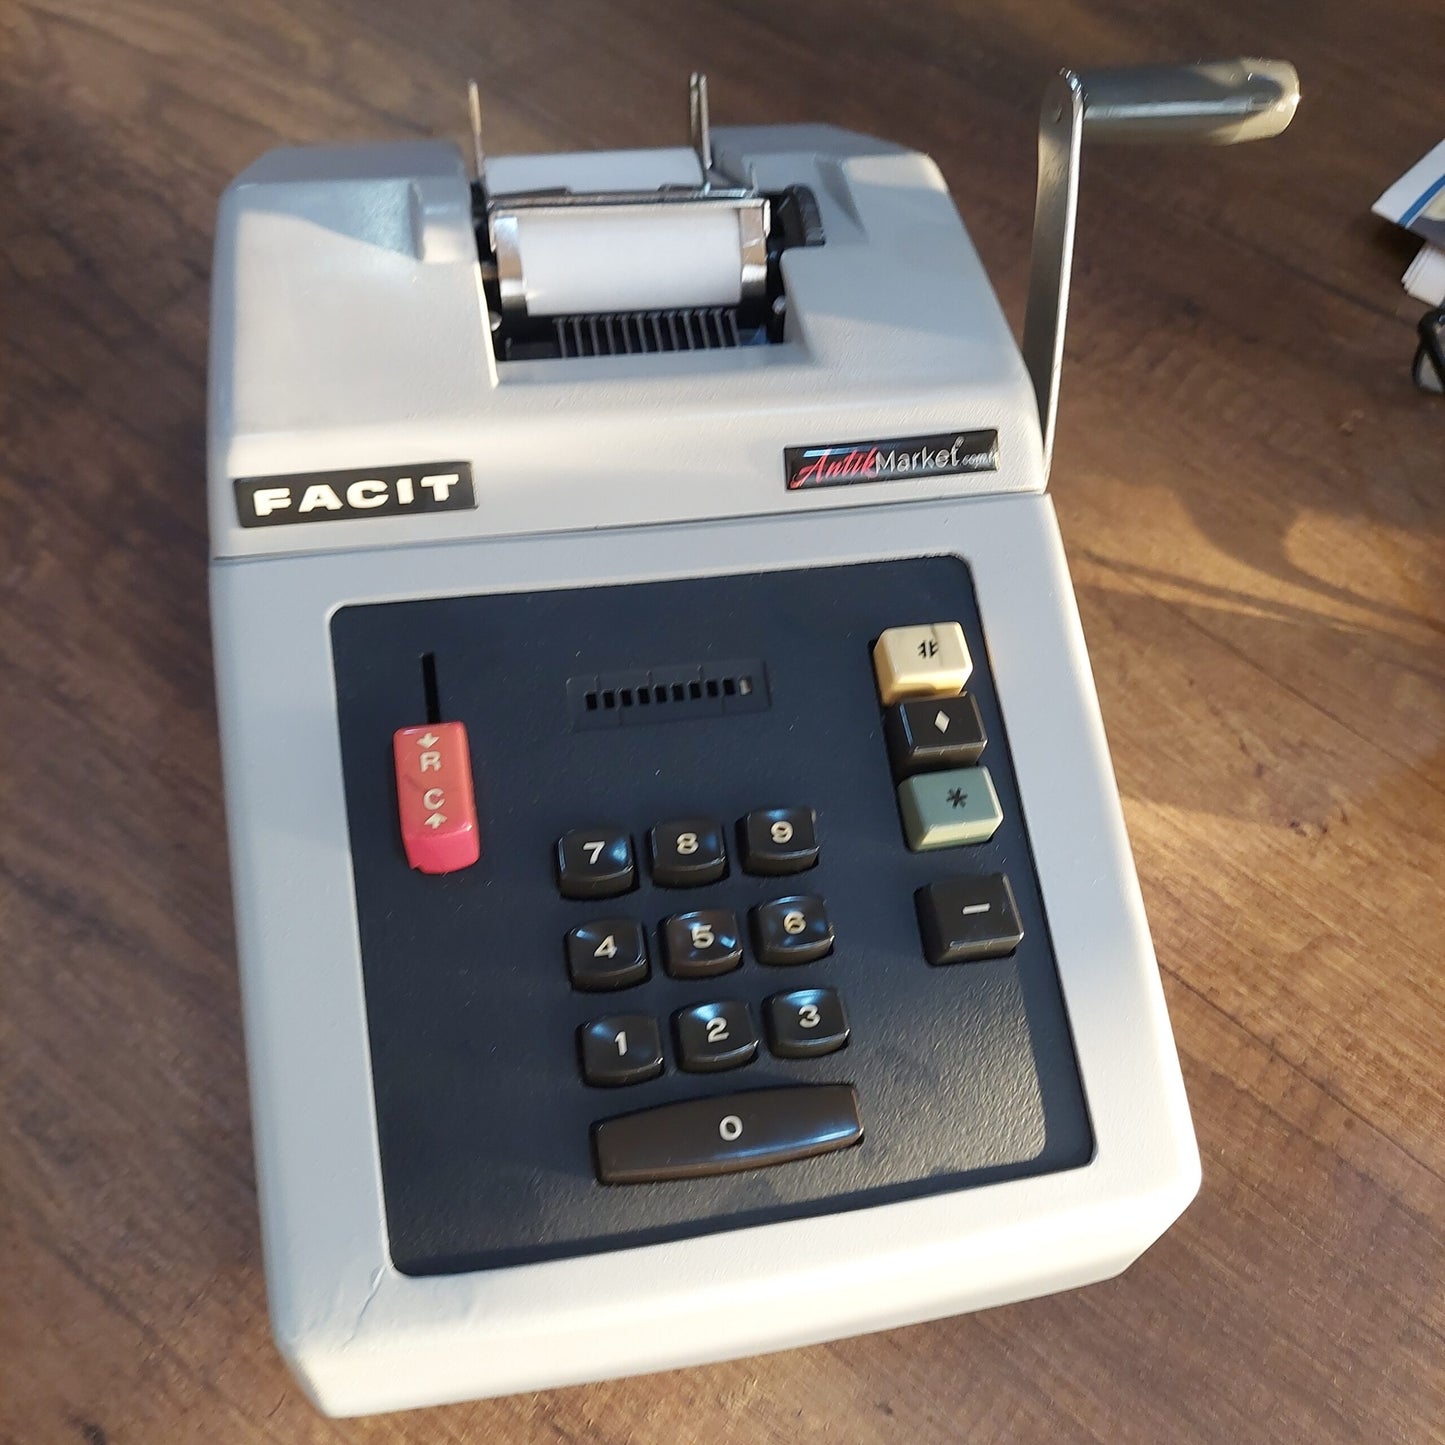 Facit 1204 model, very clean antique calculator in active working condition